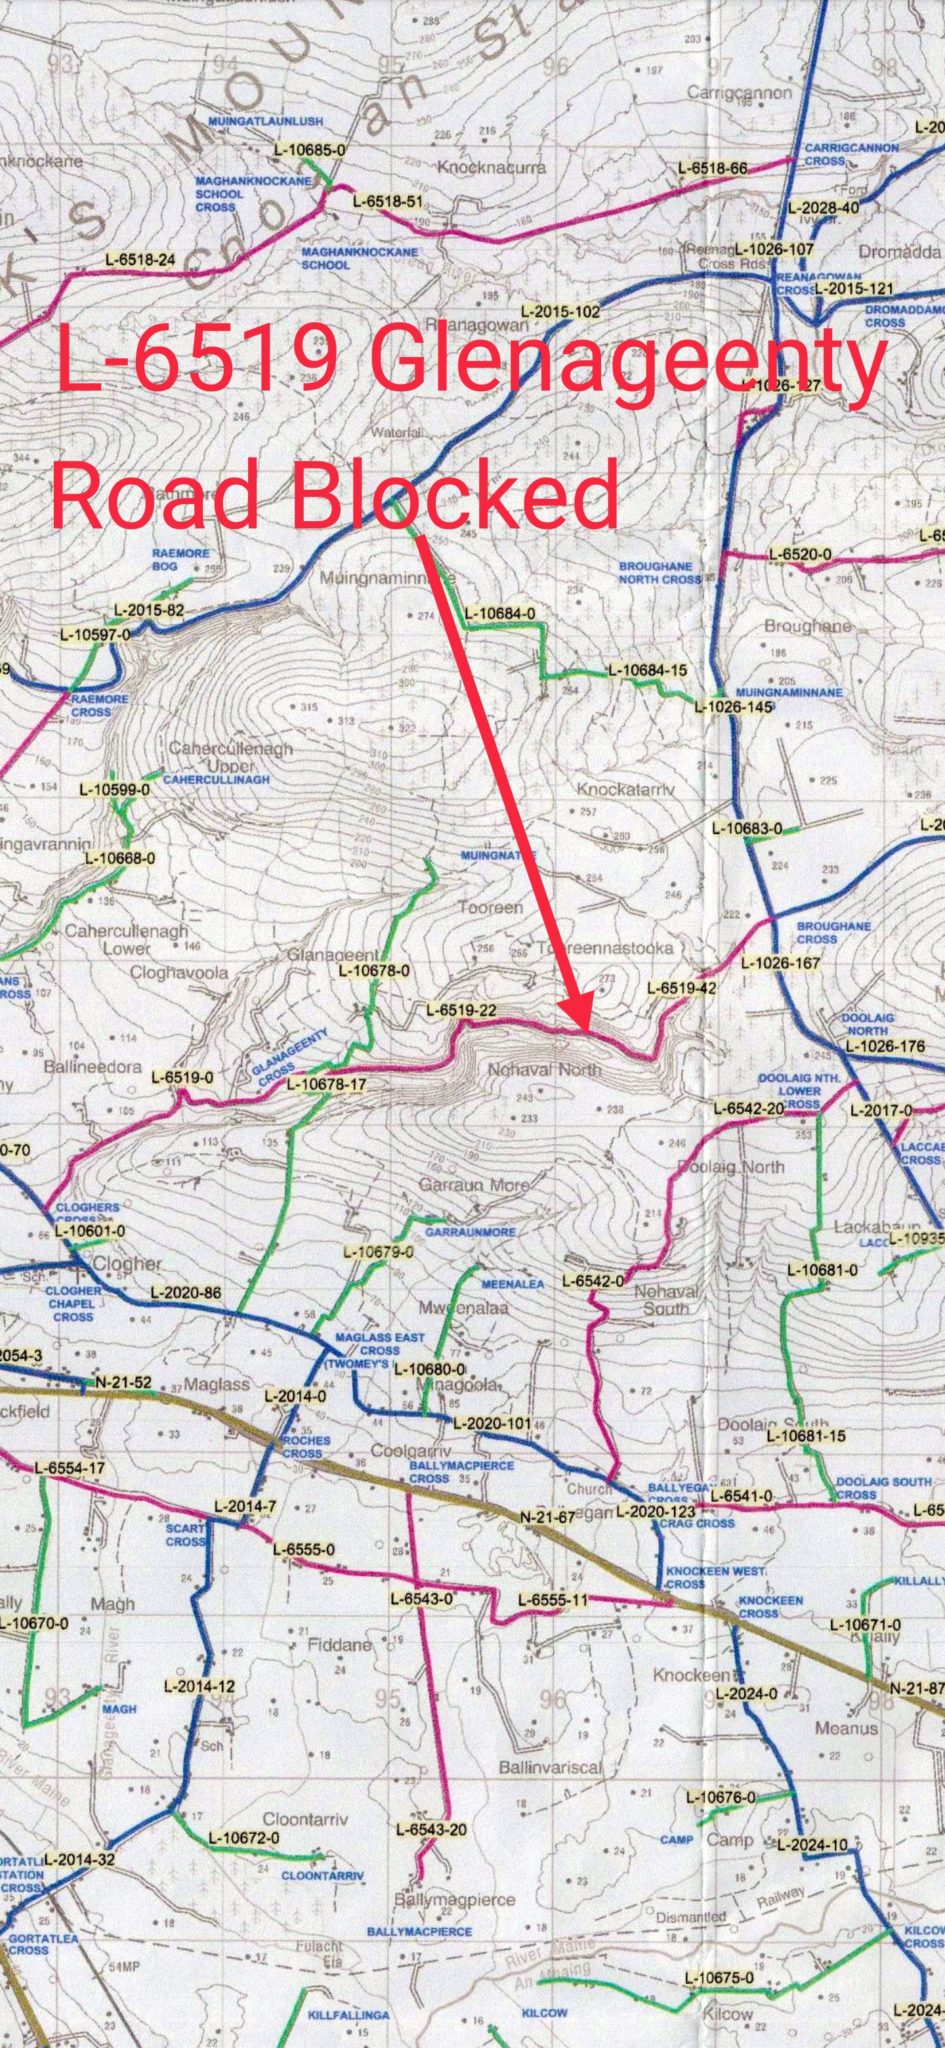 Jan 1, 2024 - Kerry County Council says the local road L6519 between Glanageenty Car Park and Broughane Cross near the Captain Monteith Memorial Road is closed until further notice and until a full assessment is completed. 